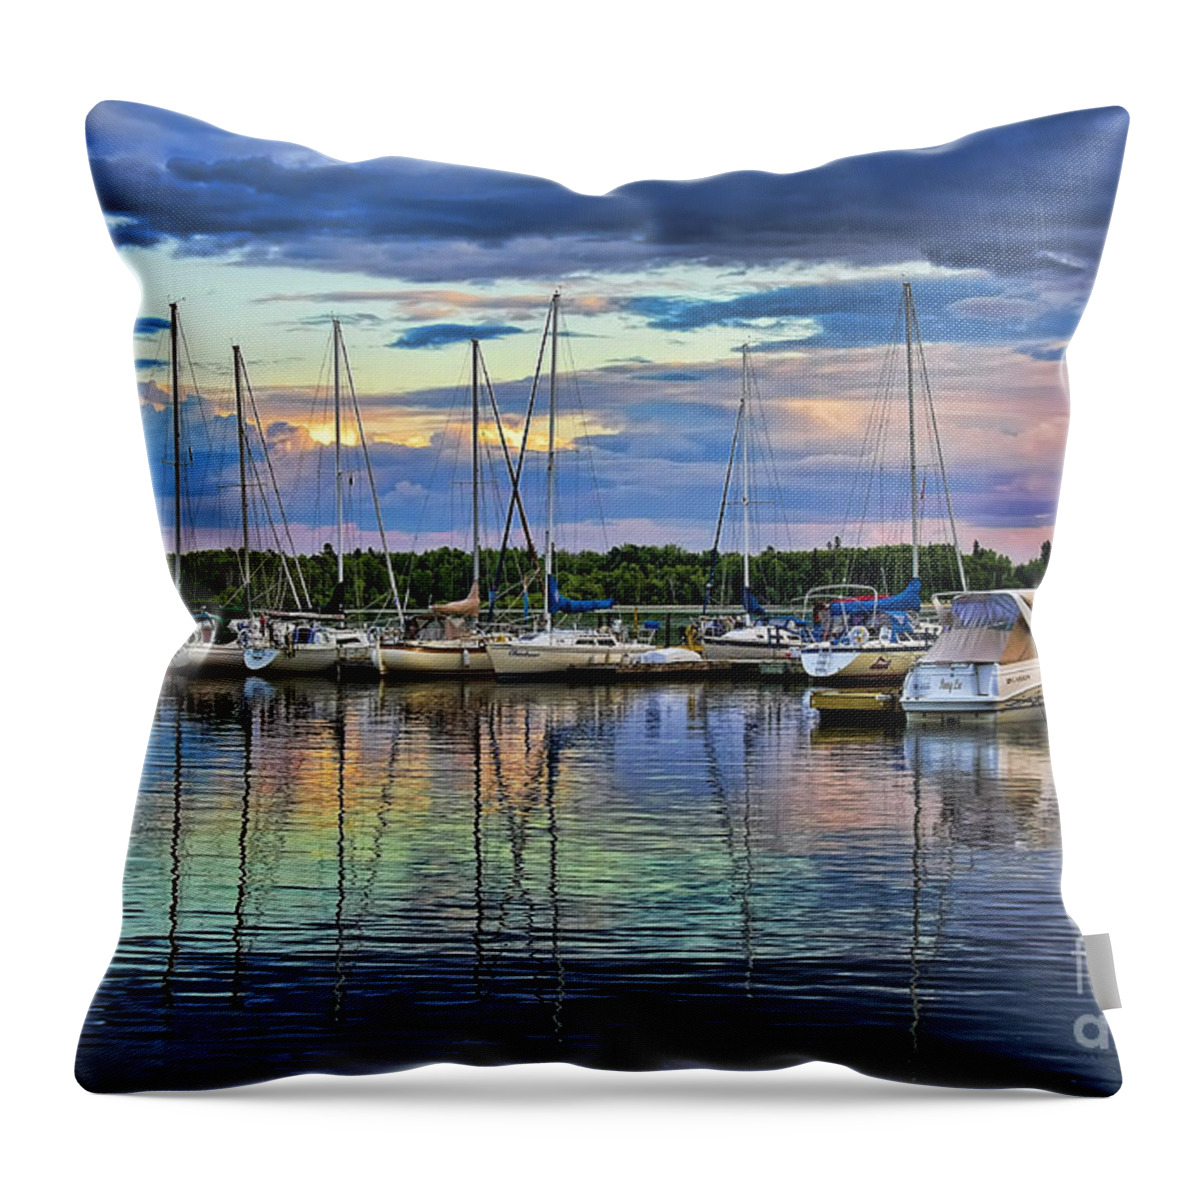 Boats Throw Pillow featuring the photograph Hecla Island Boats by Teresa Zieba